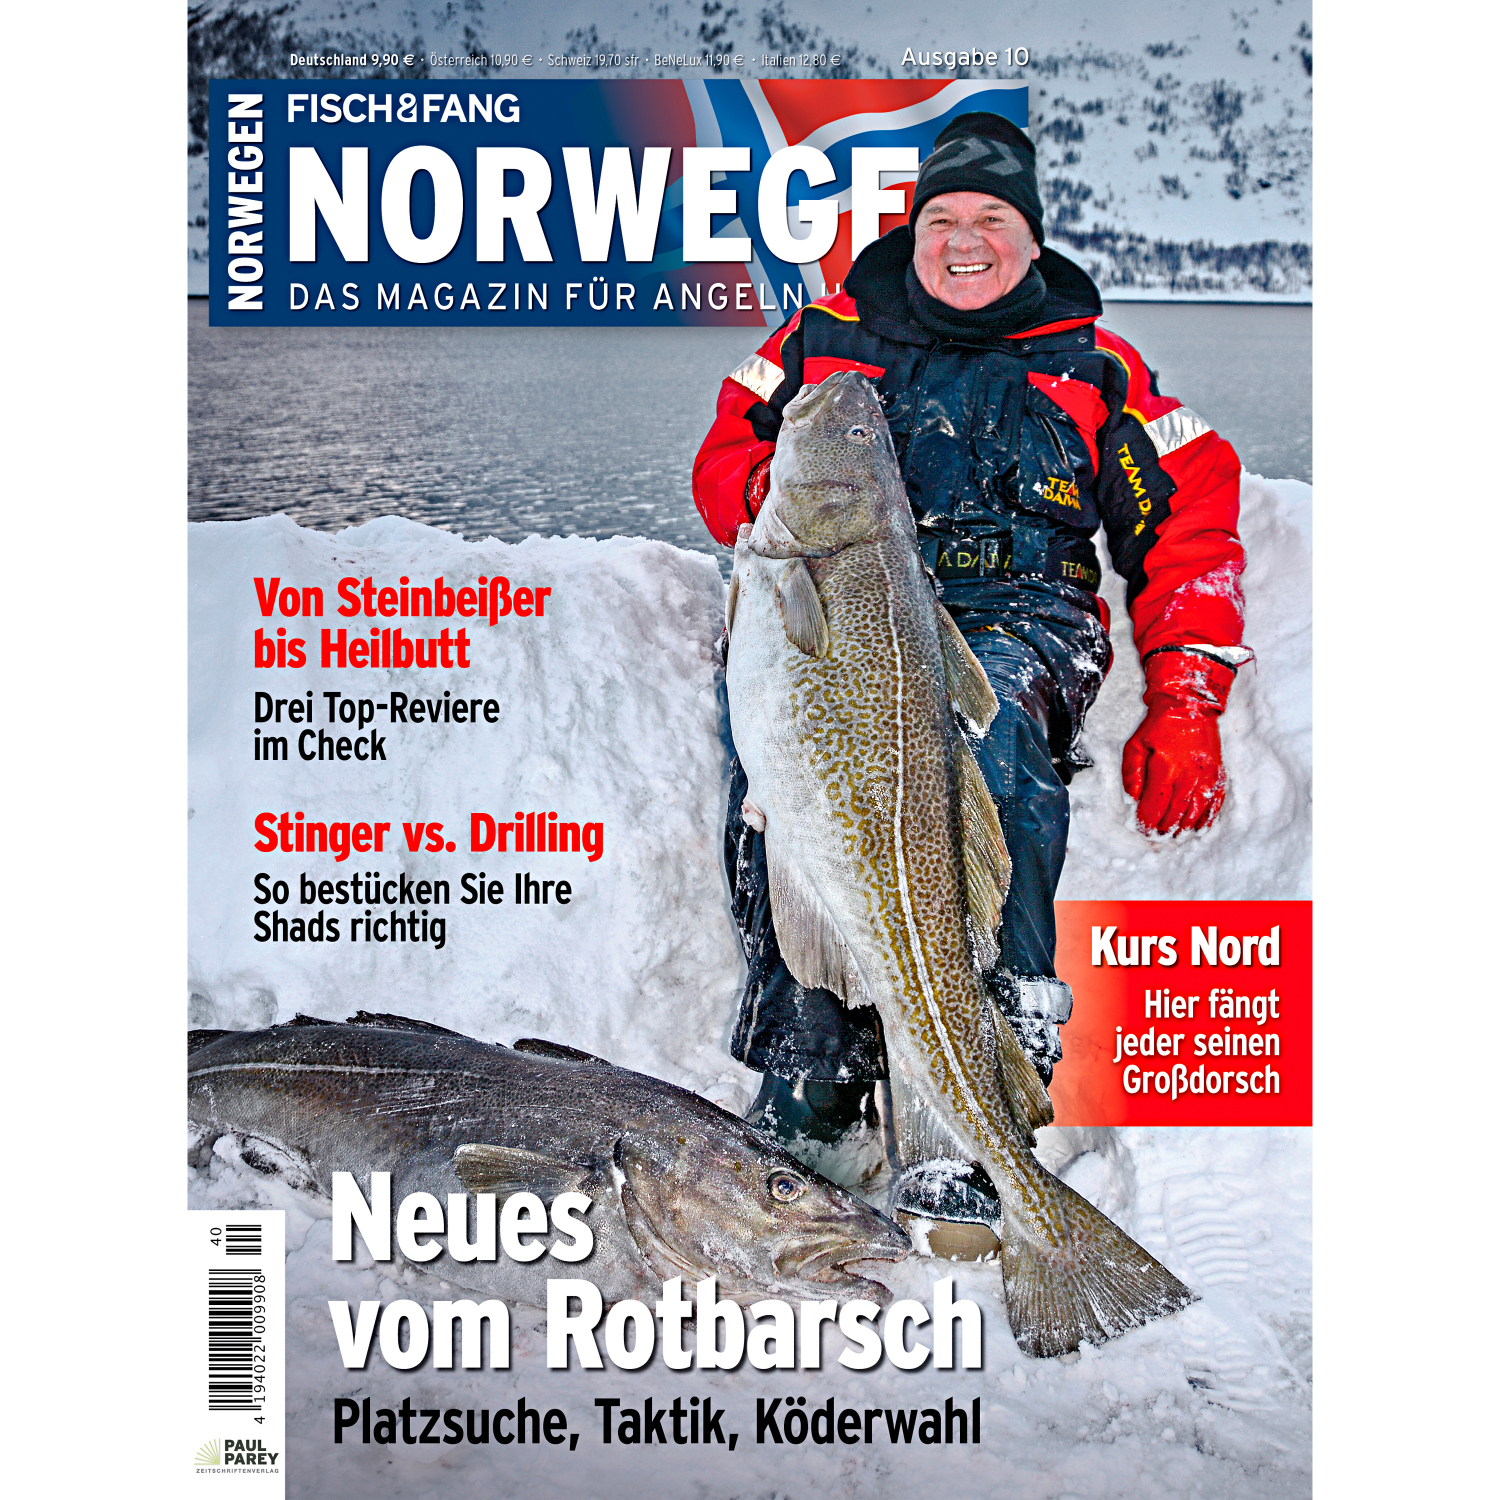 "Fisch und Fang" (Fish and catch) Norway Magazine - Edition 10 